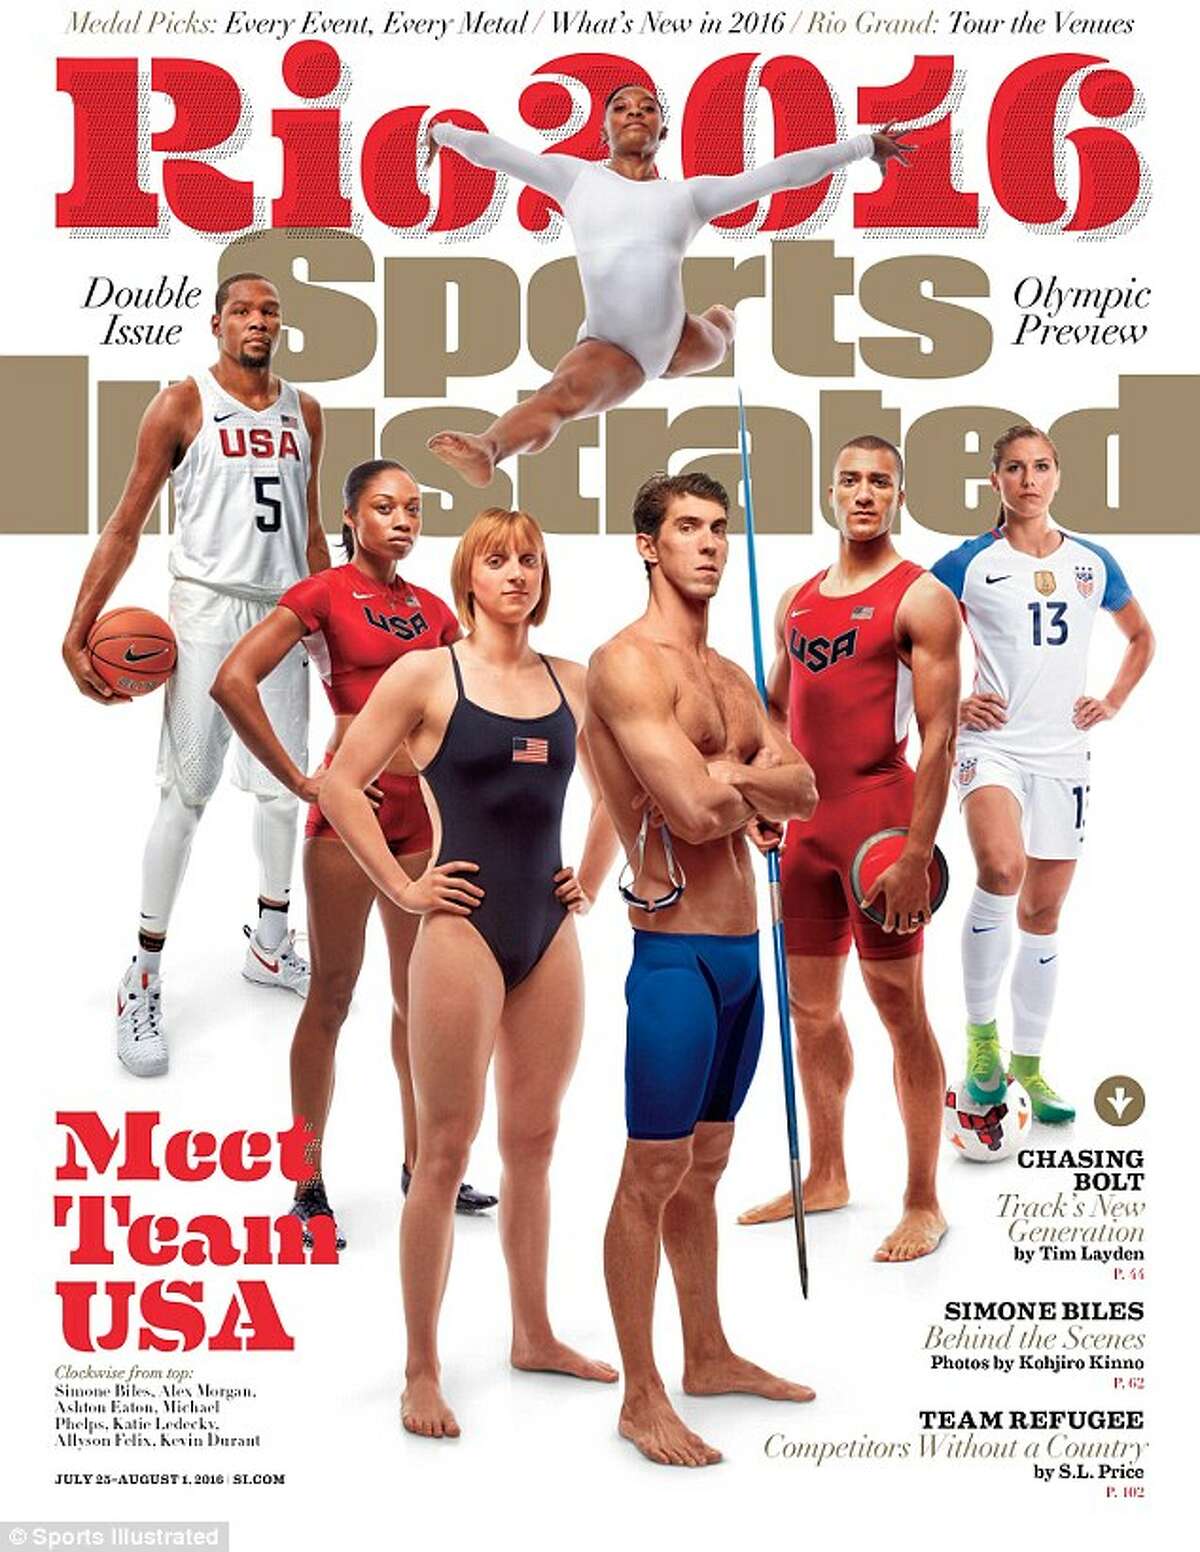 Simone Biles is featured on the cover of Sports Illustrated's upcoming Olympic Preview issue.